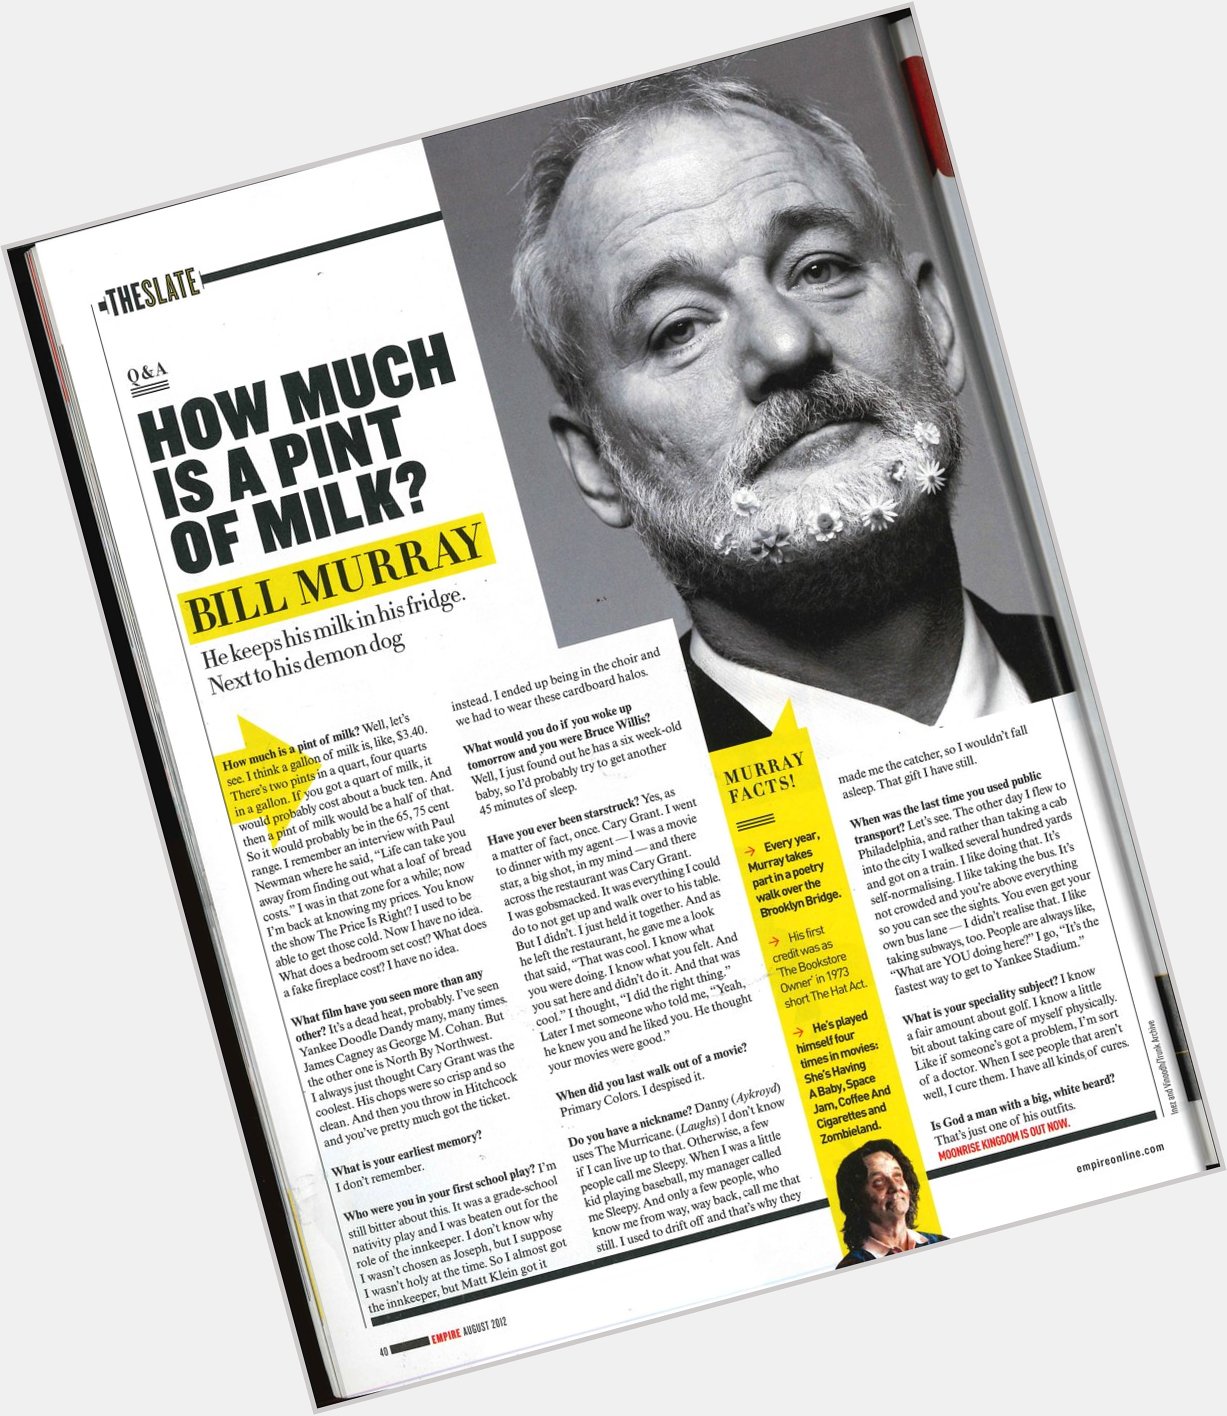 Happy birthday, Bill Murray! Here\s his Pint Of Milk interview with us, from 2012. 